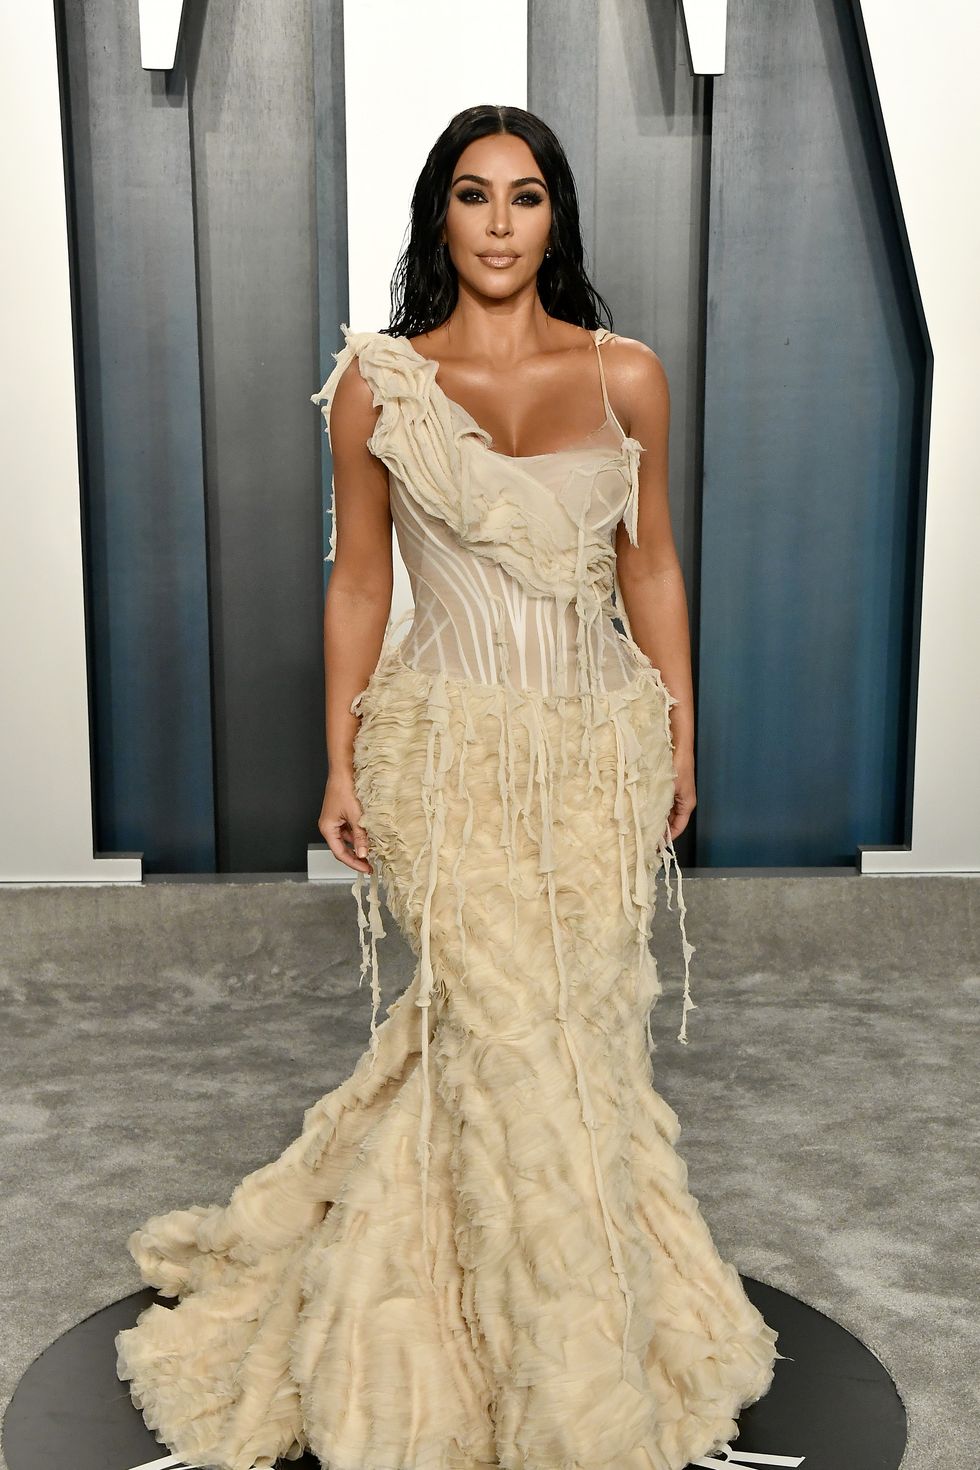 The historical significance of Kim Kardashian West's vintage